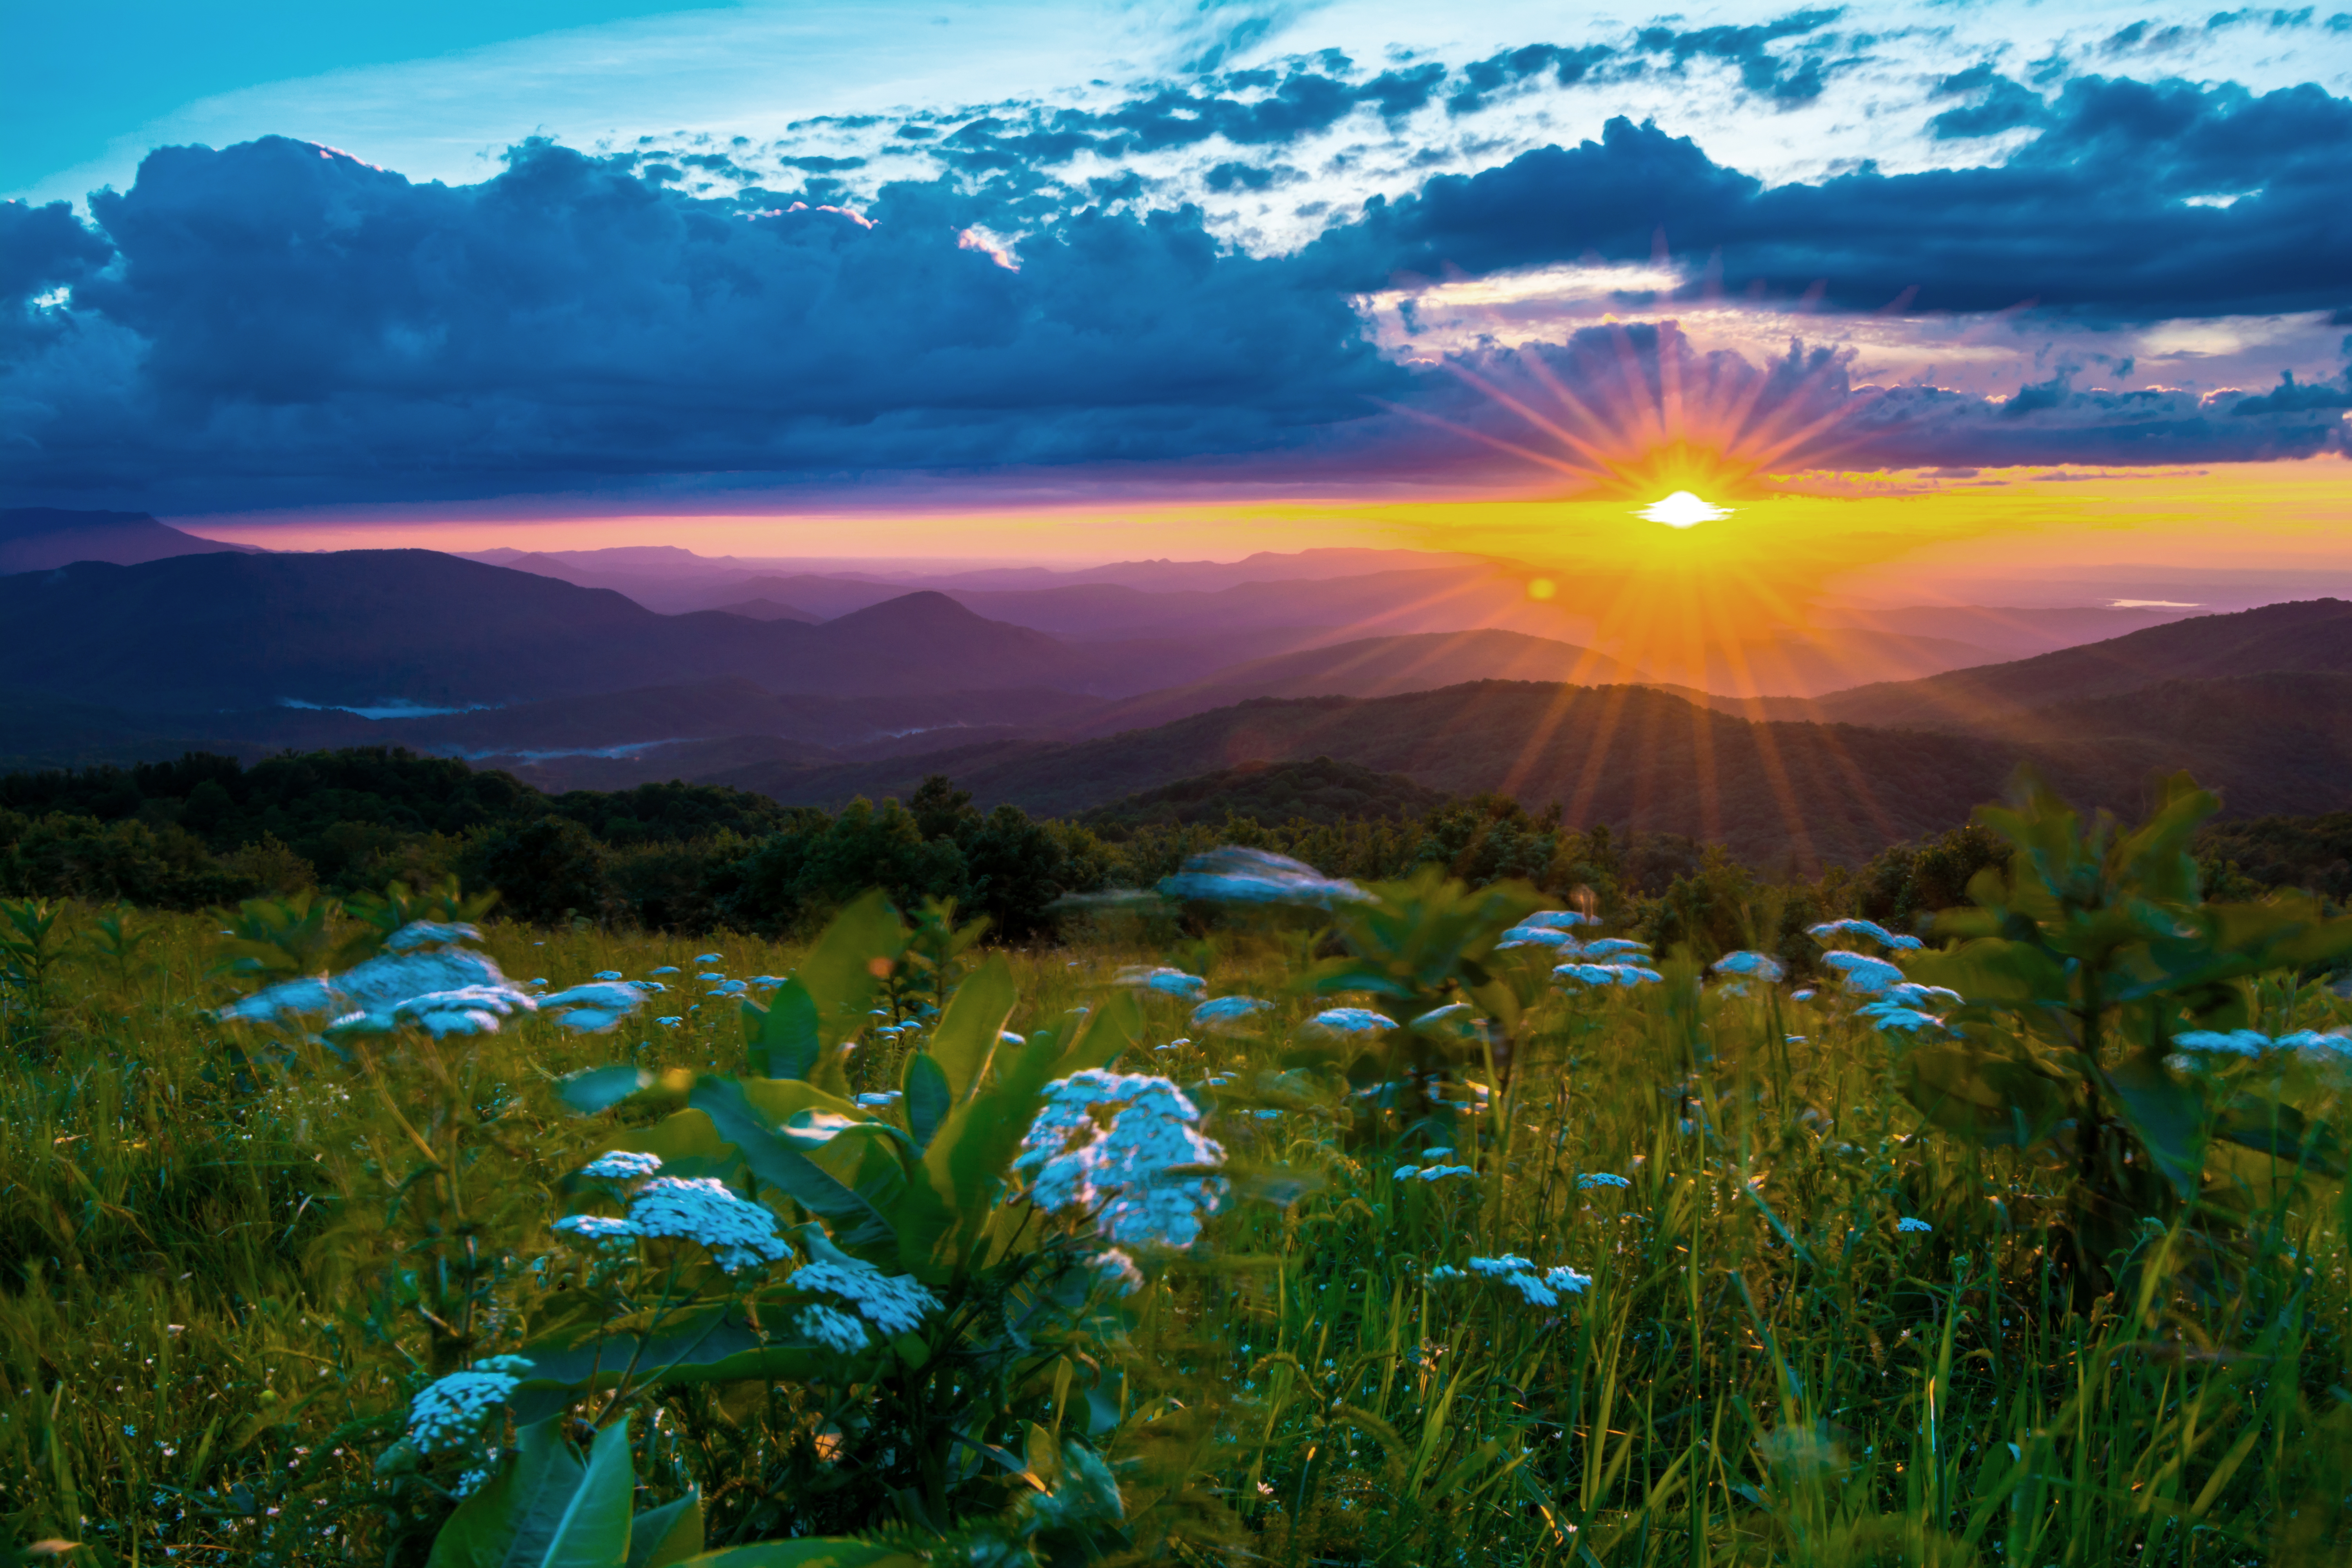 Sunset from Max Patch, NC along the Appalachian Trail.